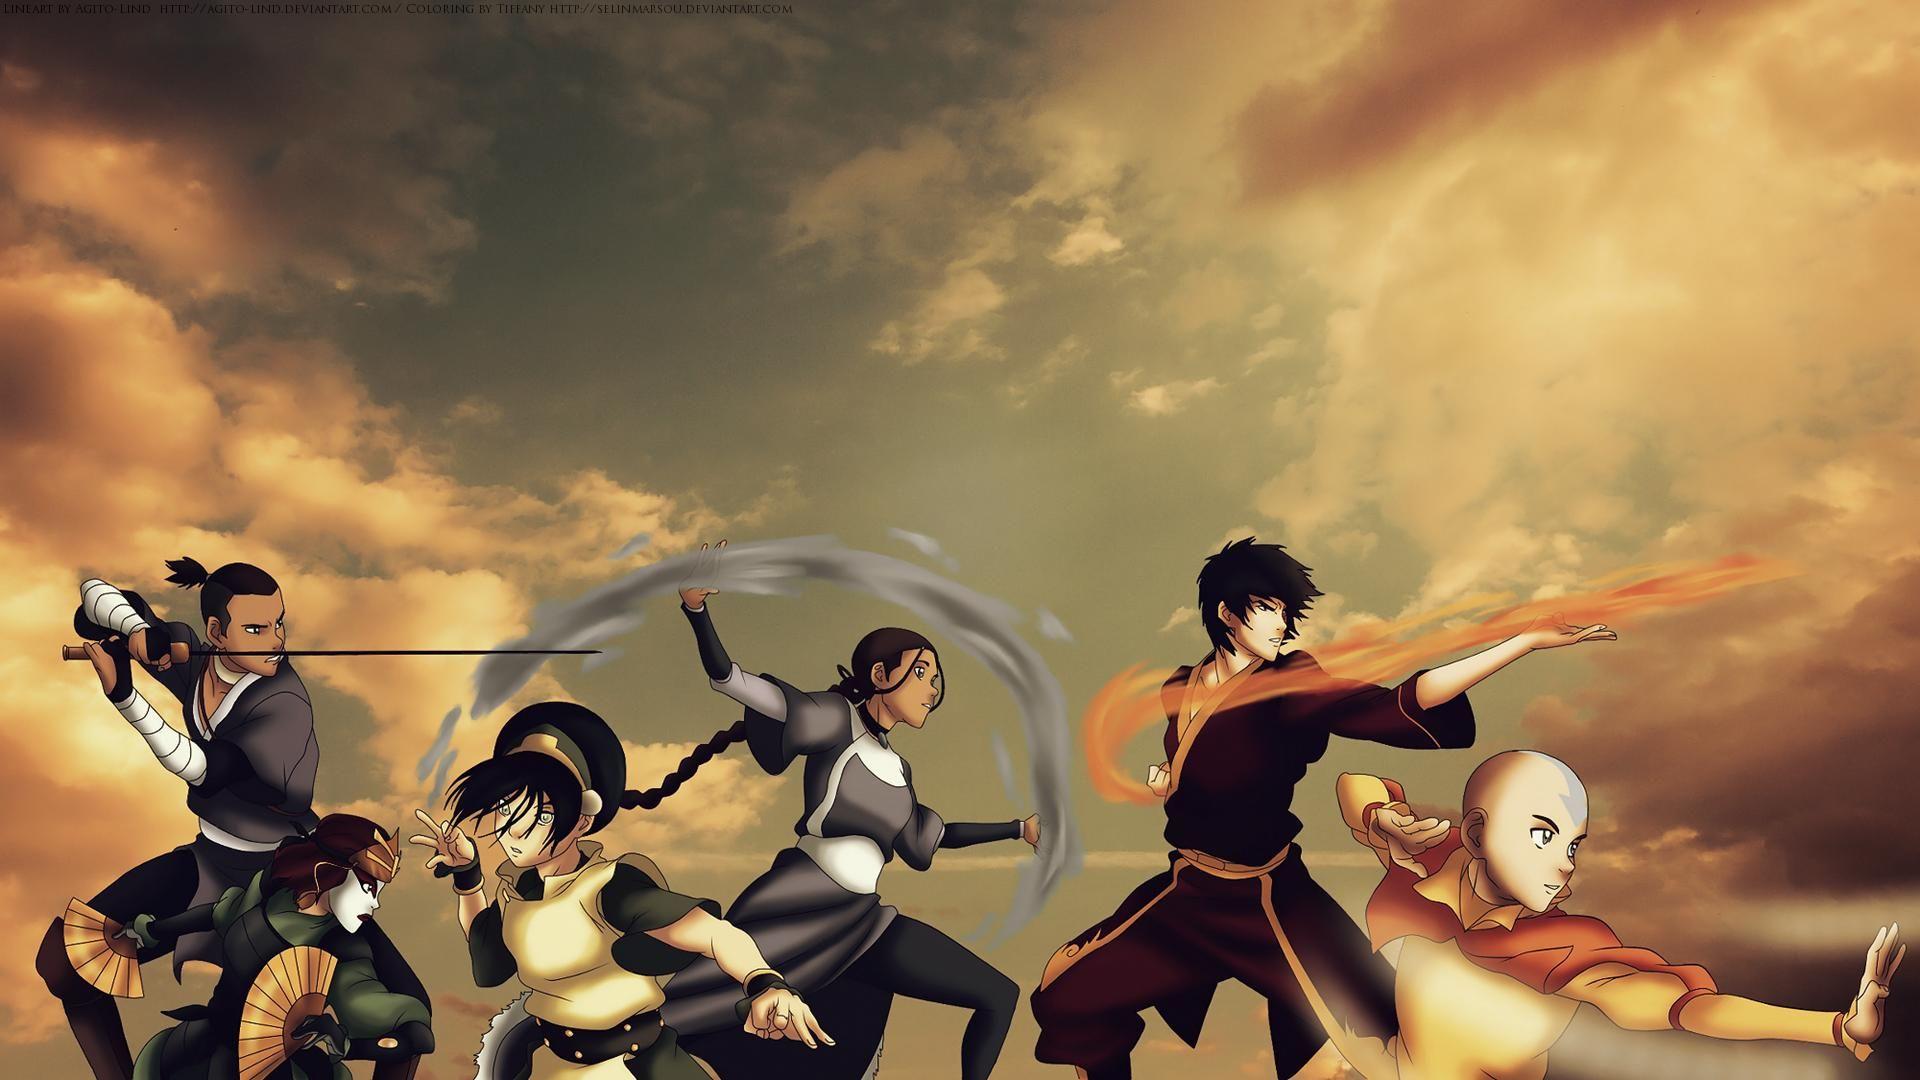 Avatar The Last Airbender Background. The last airbender, Avatar airbender, Team avatar